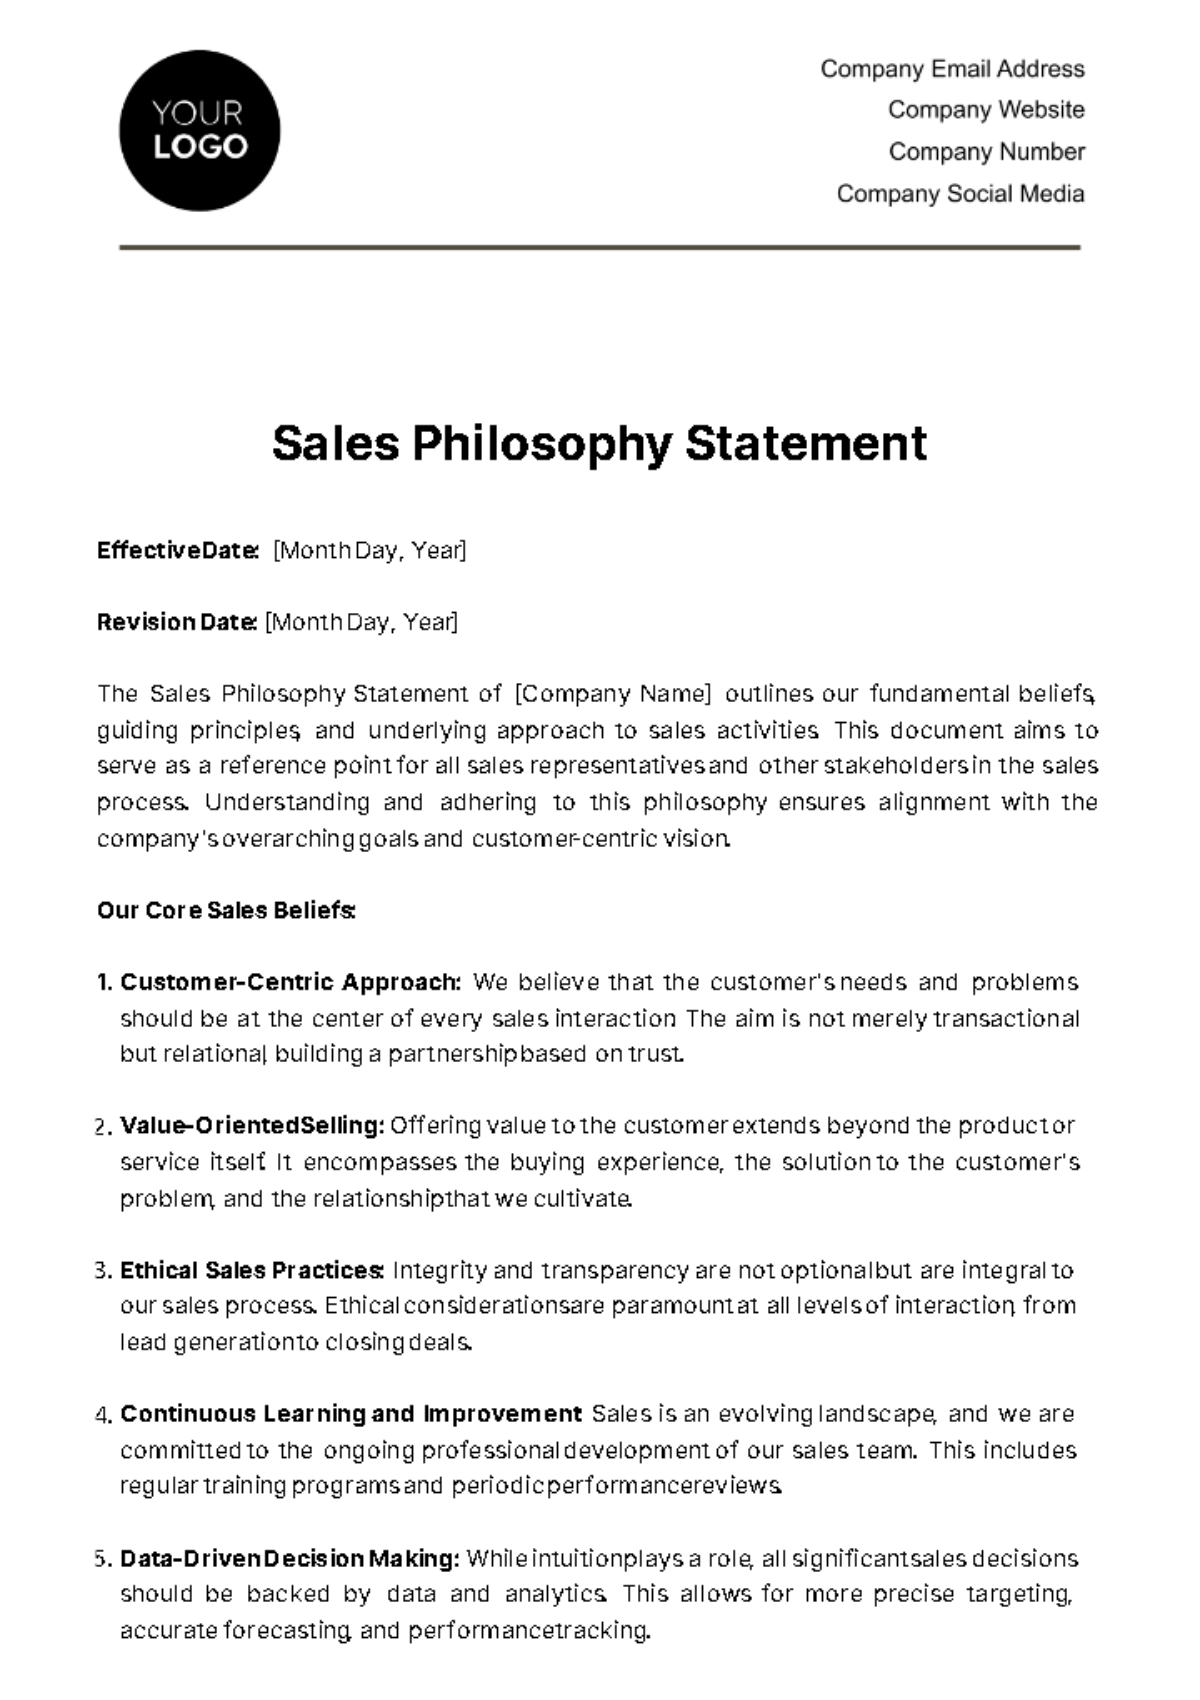 Free Sales Philosophy Statement Template